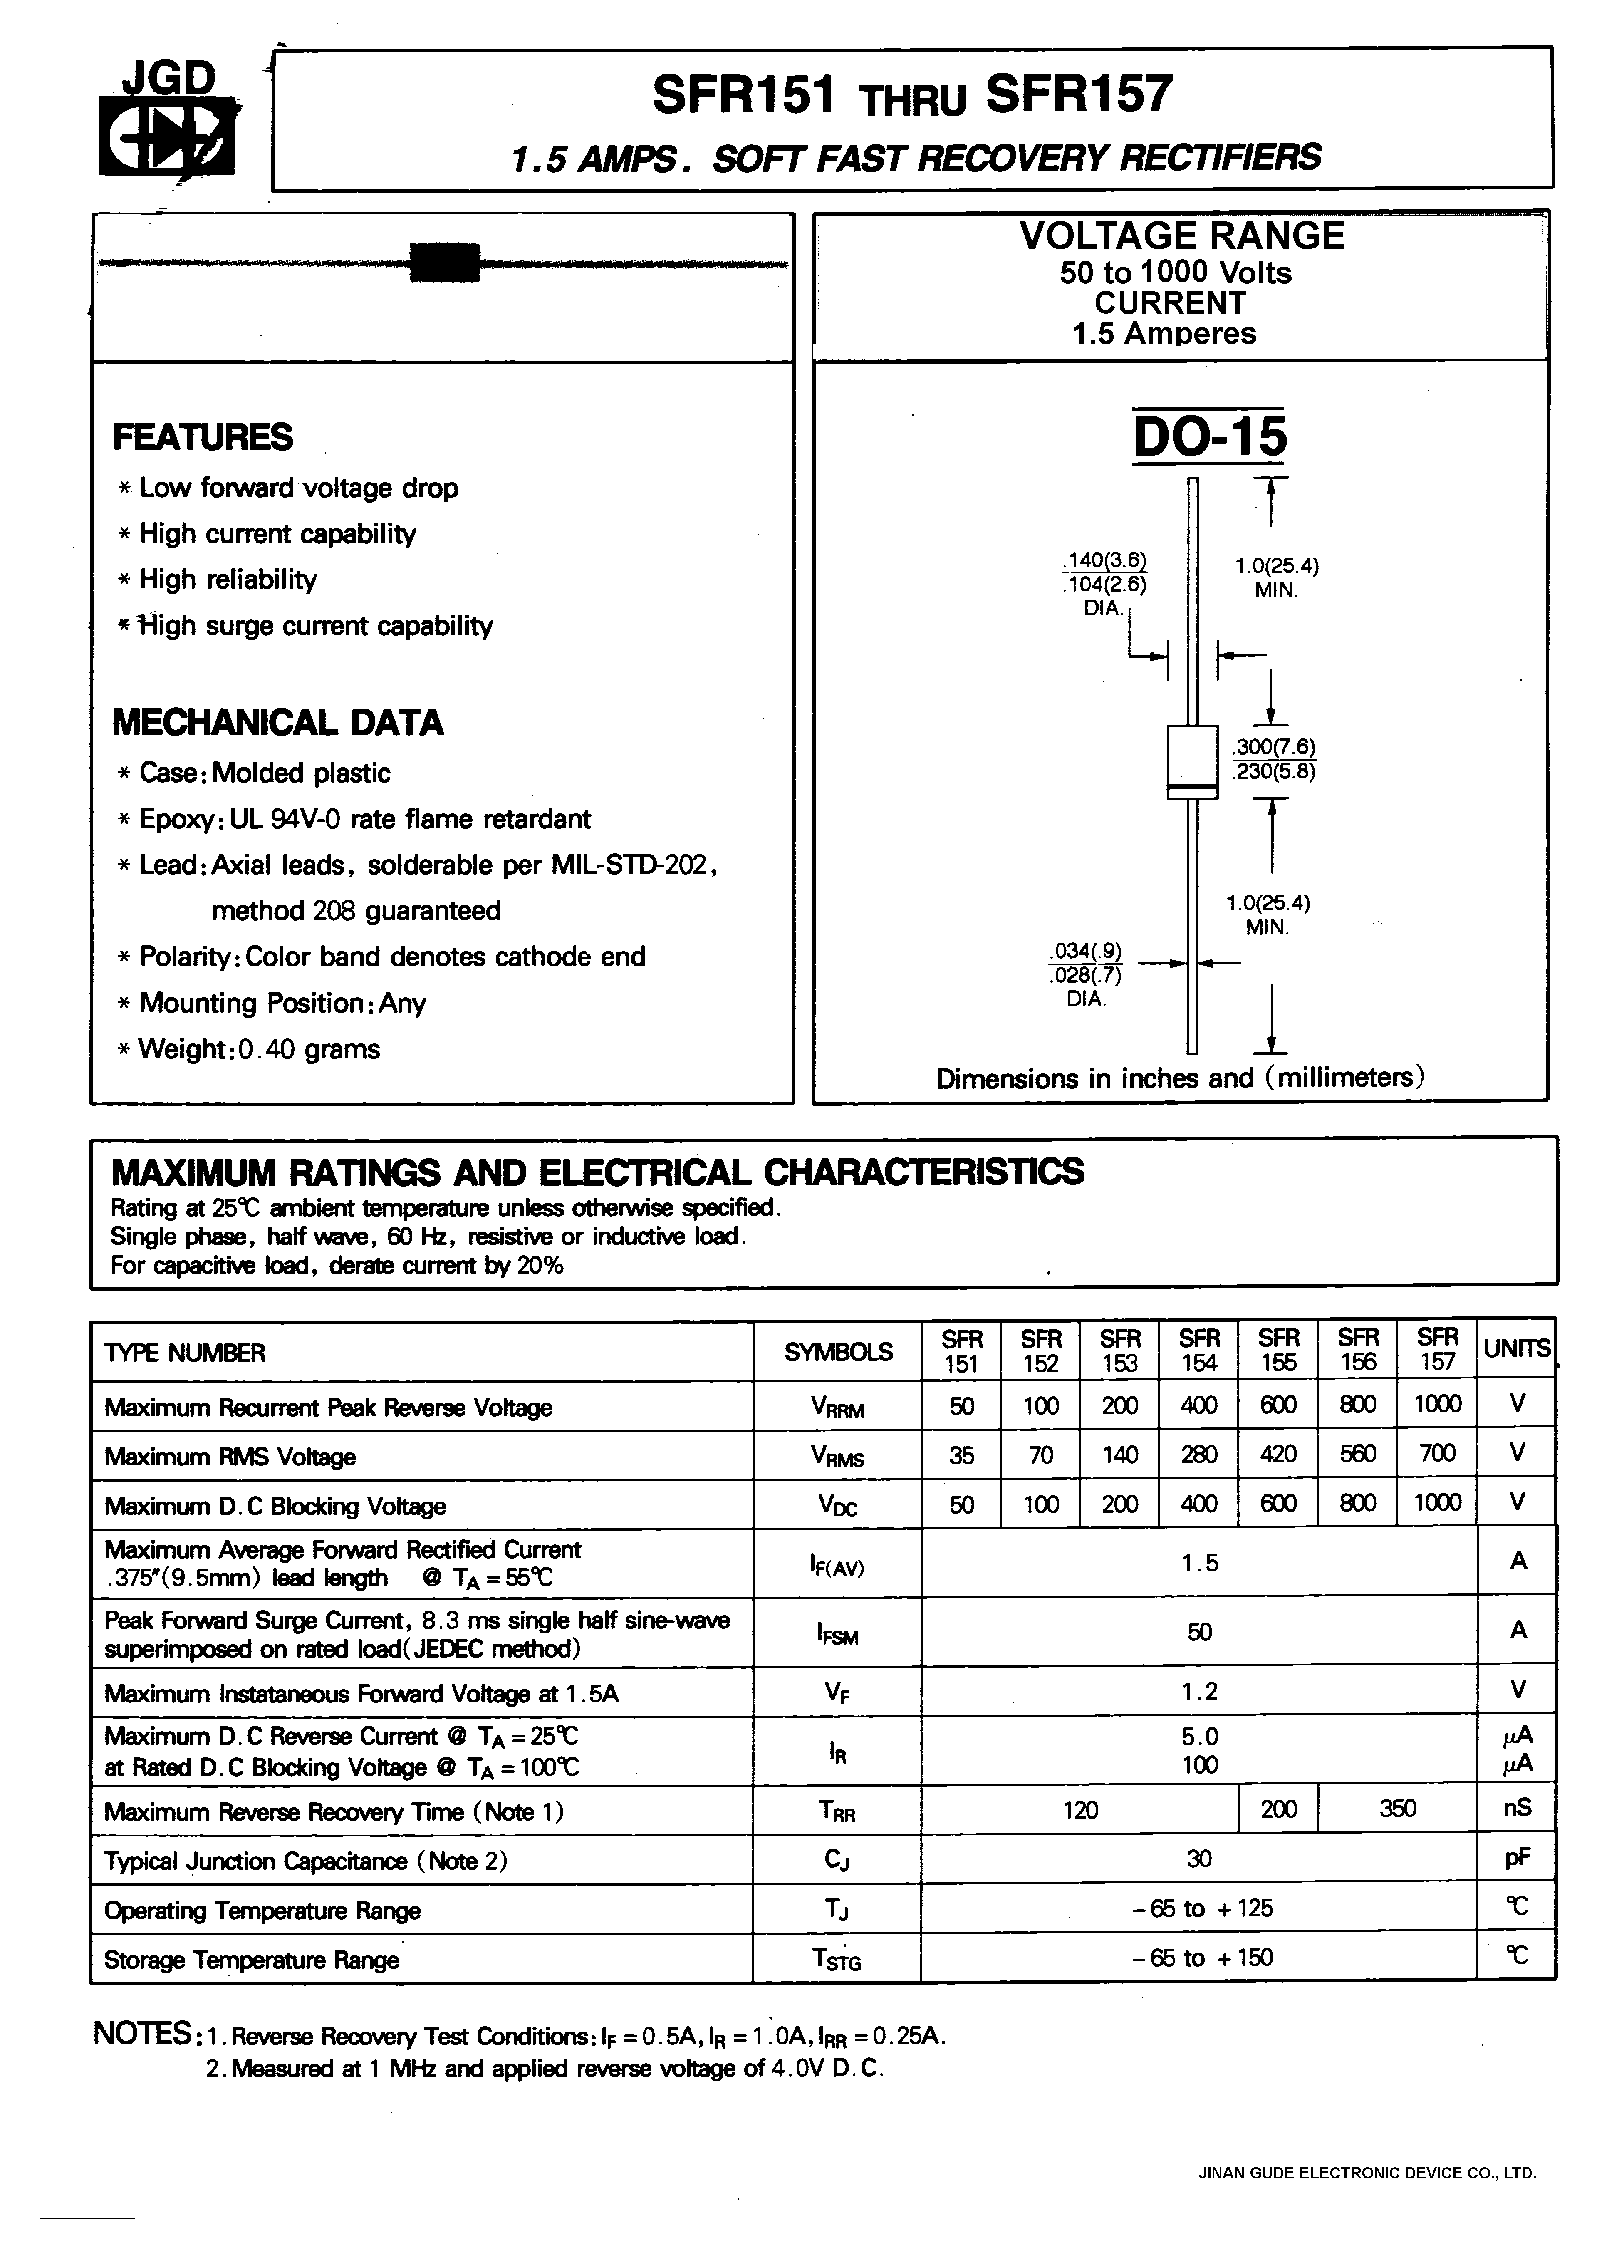 Datasheet SFR152 - 1.5 AMPS. SOFT FAST RECOVERY RECTIFIERS page 1